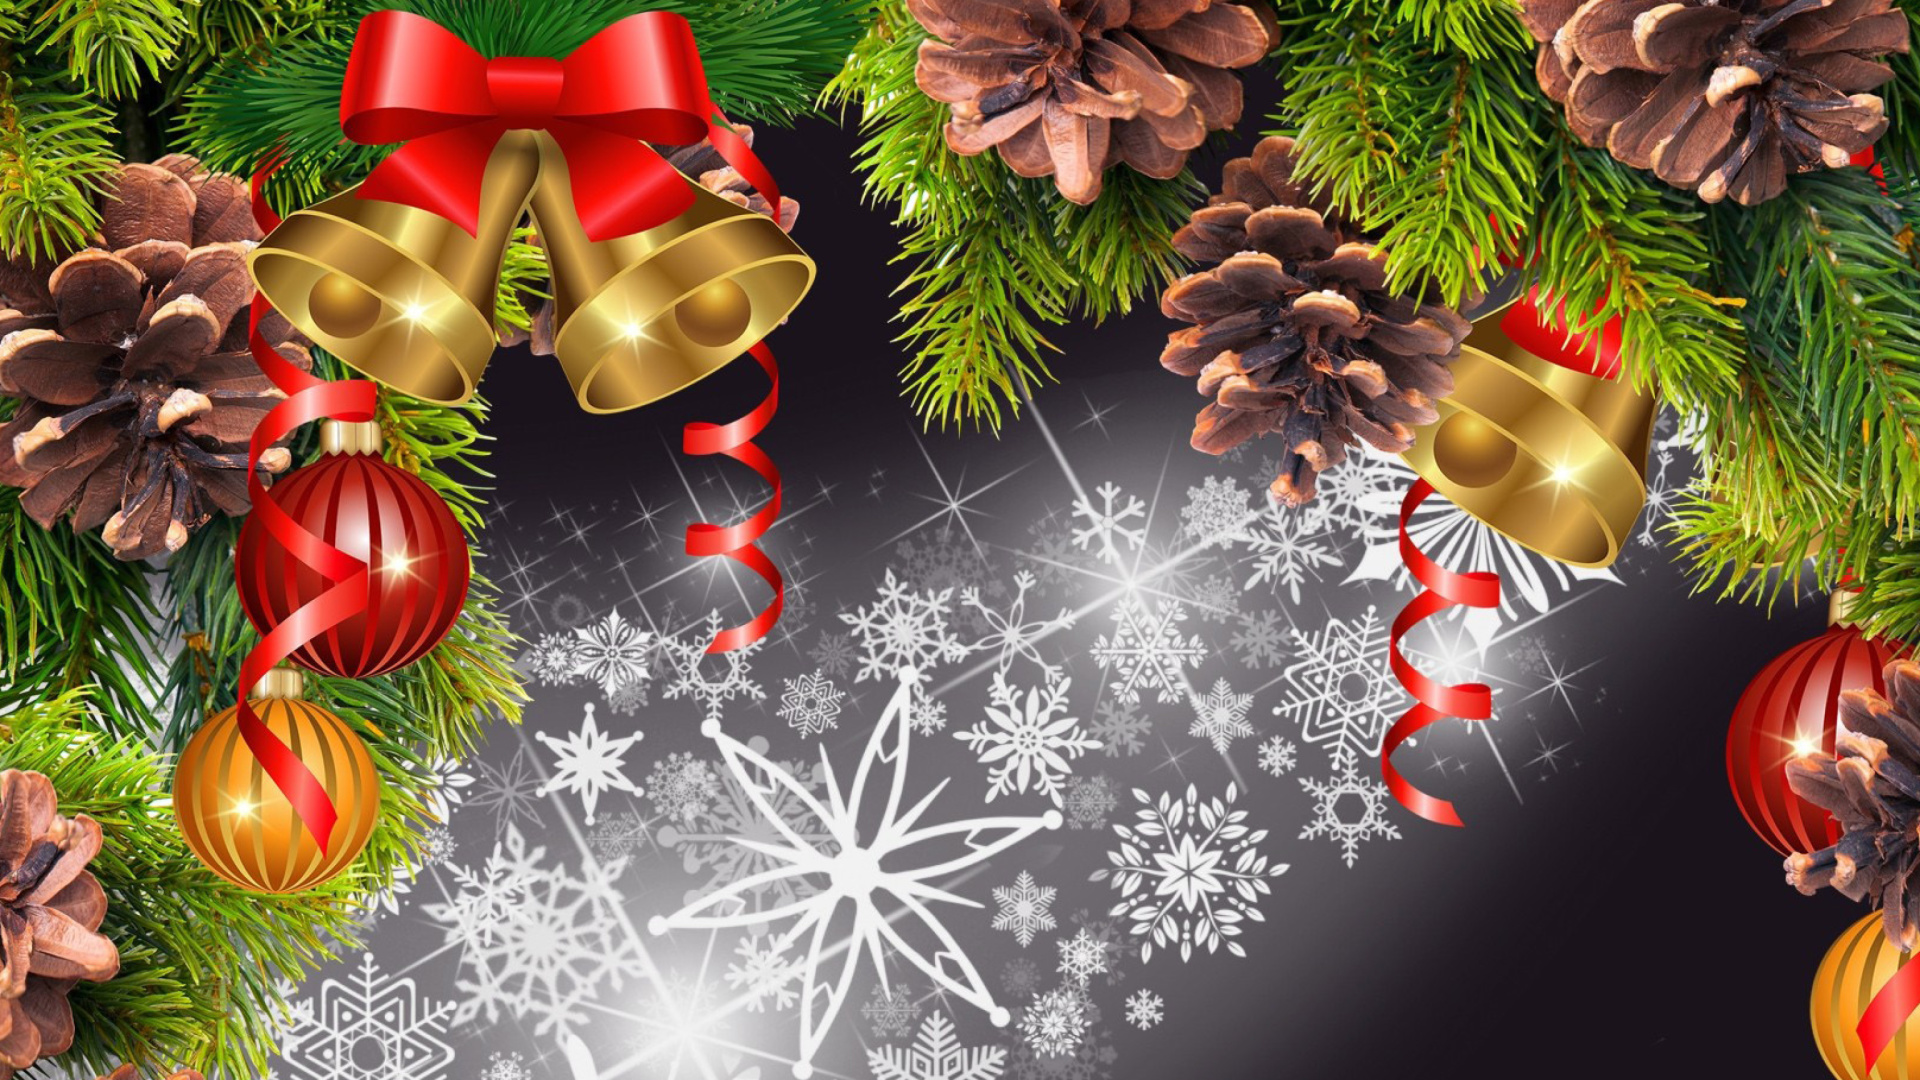 Ways to Decorate Your Christmas Tree wallpaper 1920x1080